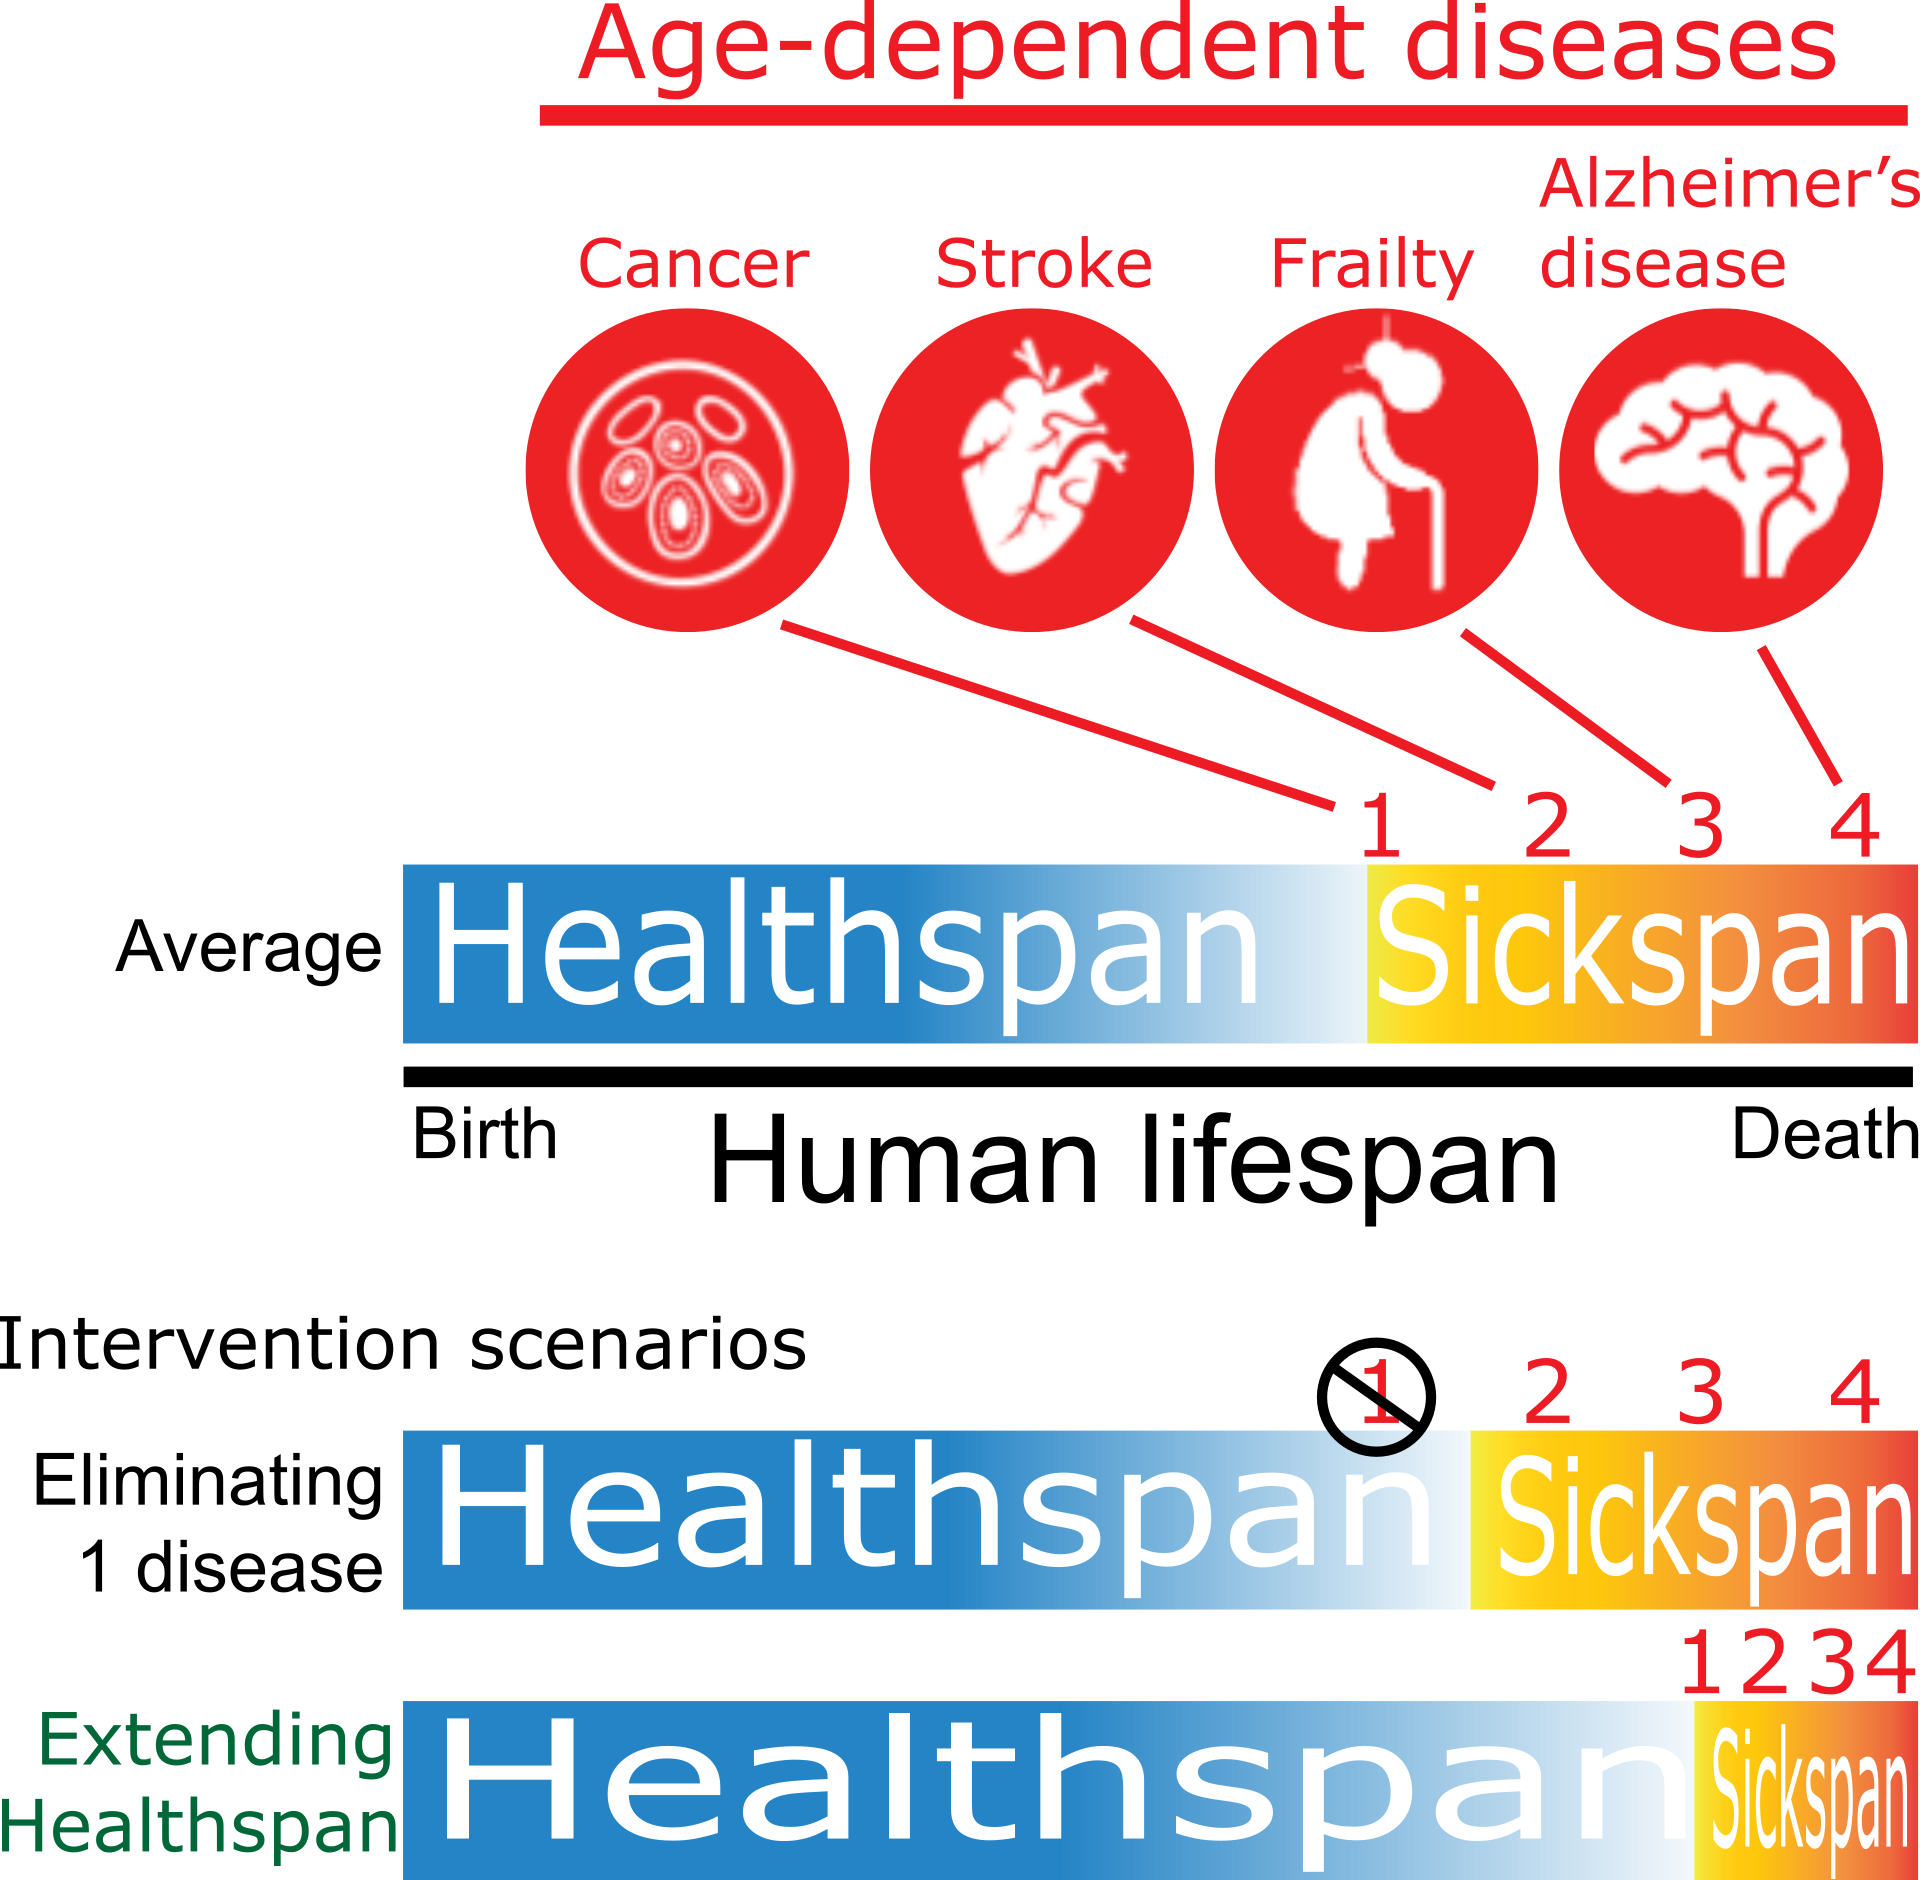 age-dependent diseases, graphical overview comparing the health-span for different scenarios